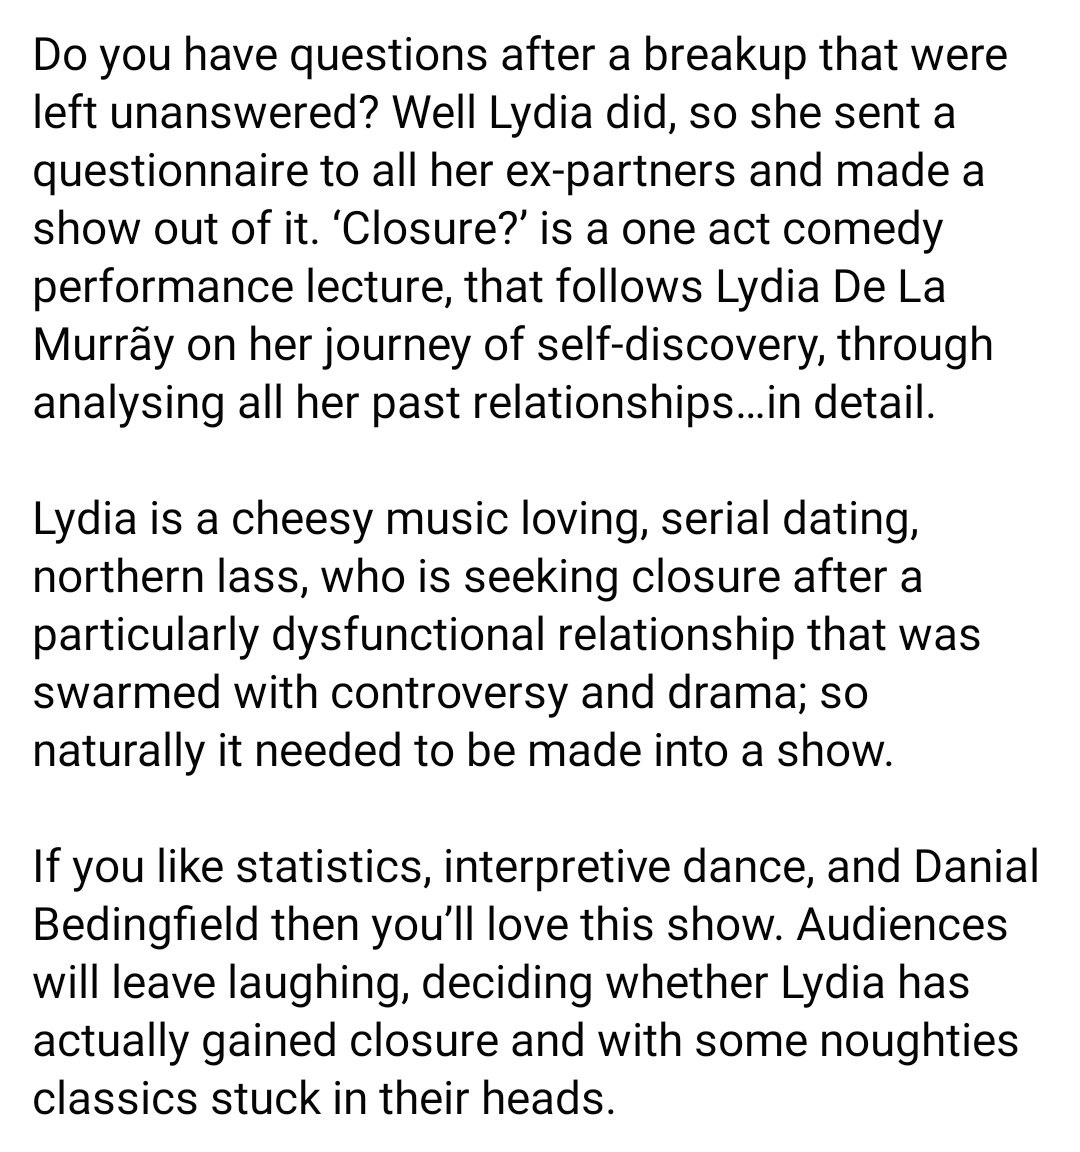 Theatre Event - Closure- supported by Black Country Touring
At Central Library, High Street, West Bromwich,
Thursday 23rd May 2024
Doors open at 7pm. Starts at 7.30pm

To book tickets, please use the link 
ticketsource.co.uk/sandwell-libra…

#WestBromwich #theatre  #blackcountrytouring